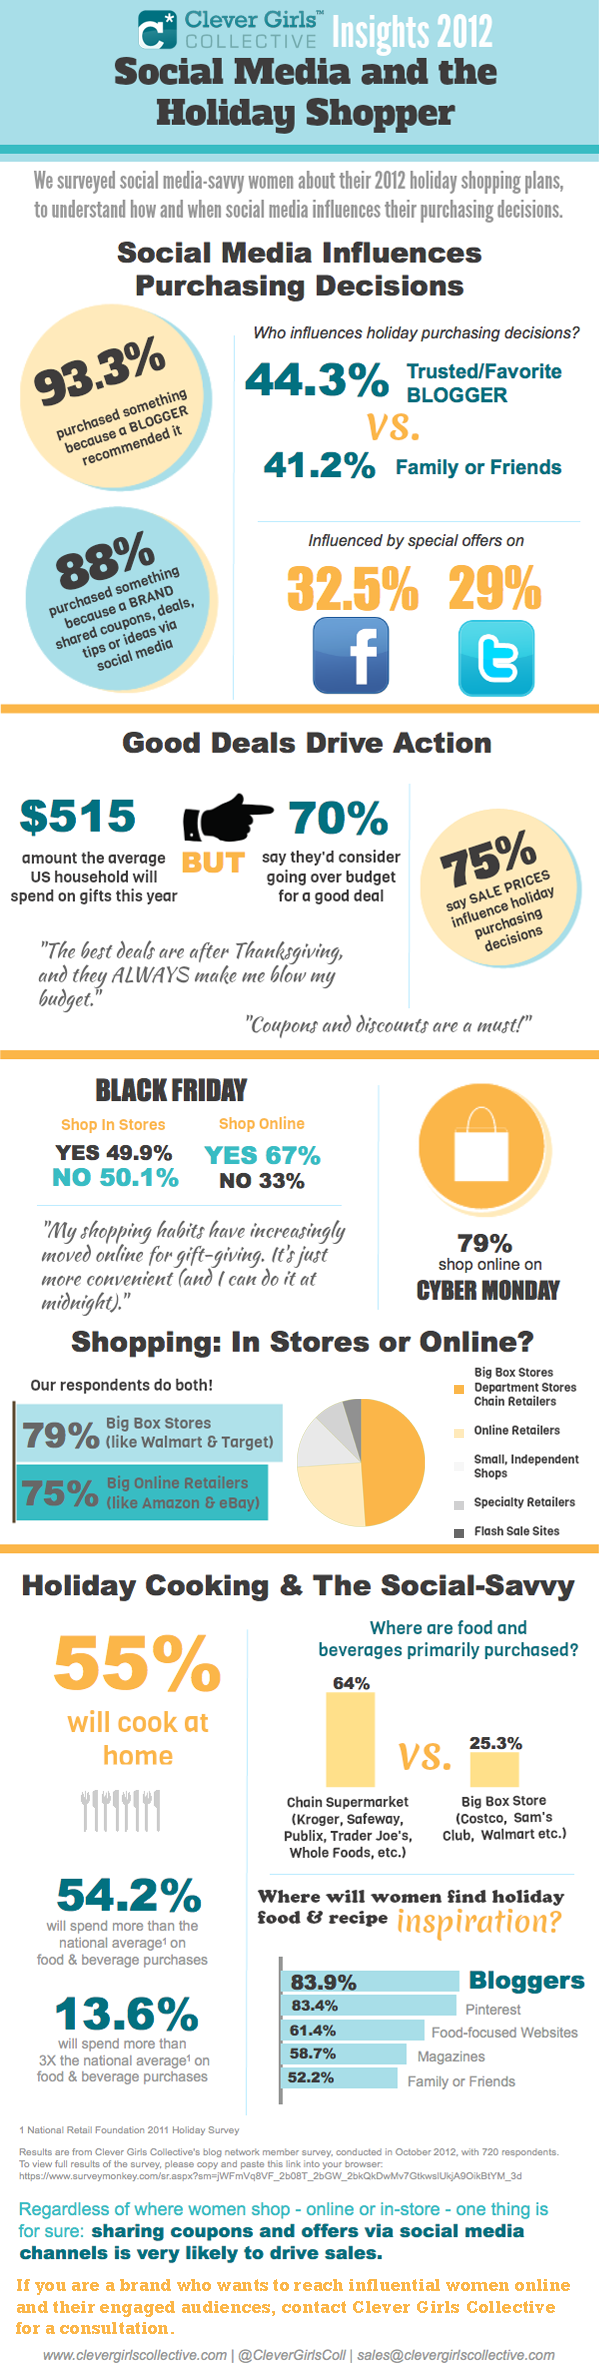 Clever Girls Collective 2012 Holiday Shopping Survey INFOGRAPHIC